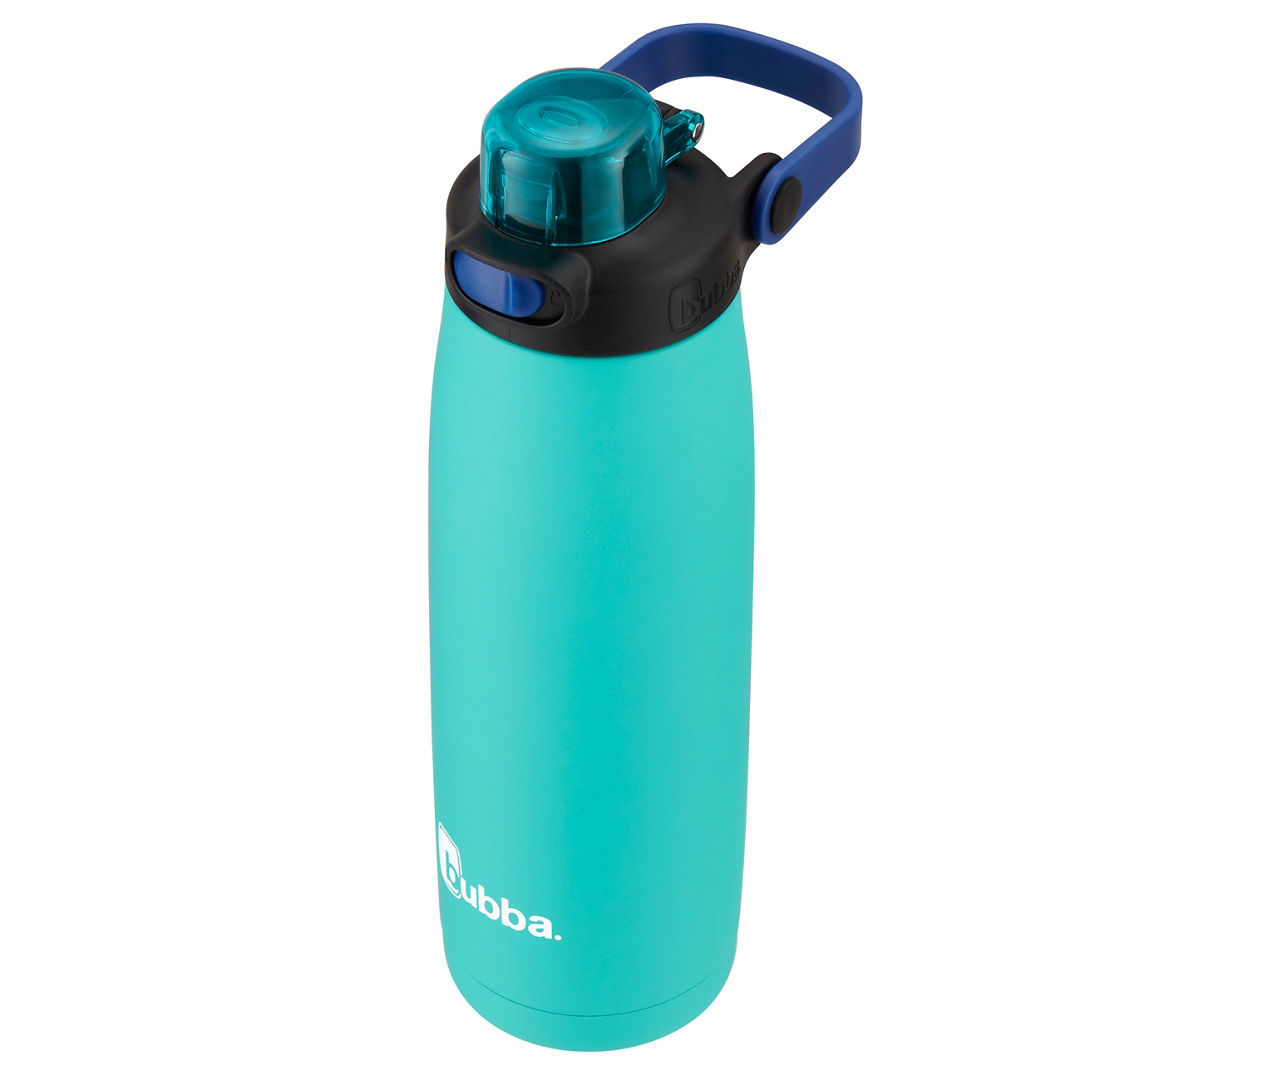 Bubba - Teal Radiant Chug Stainless Steel Water Bottle, 24 oz.